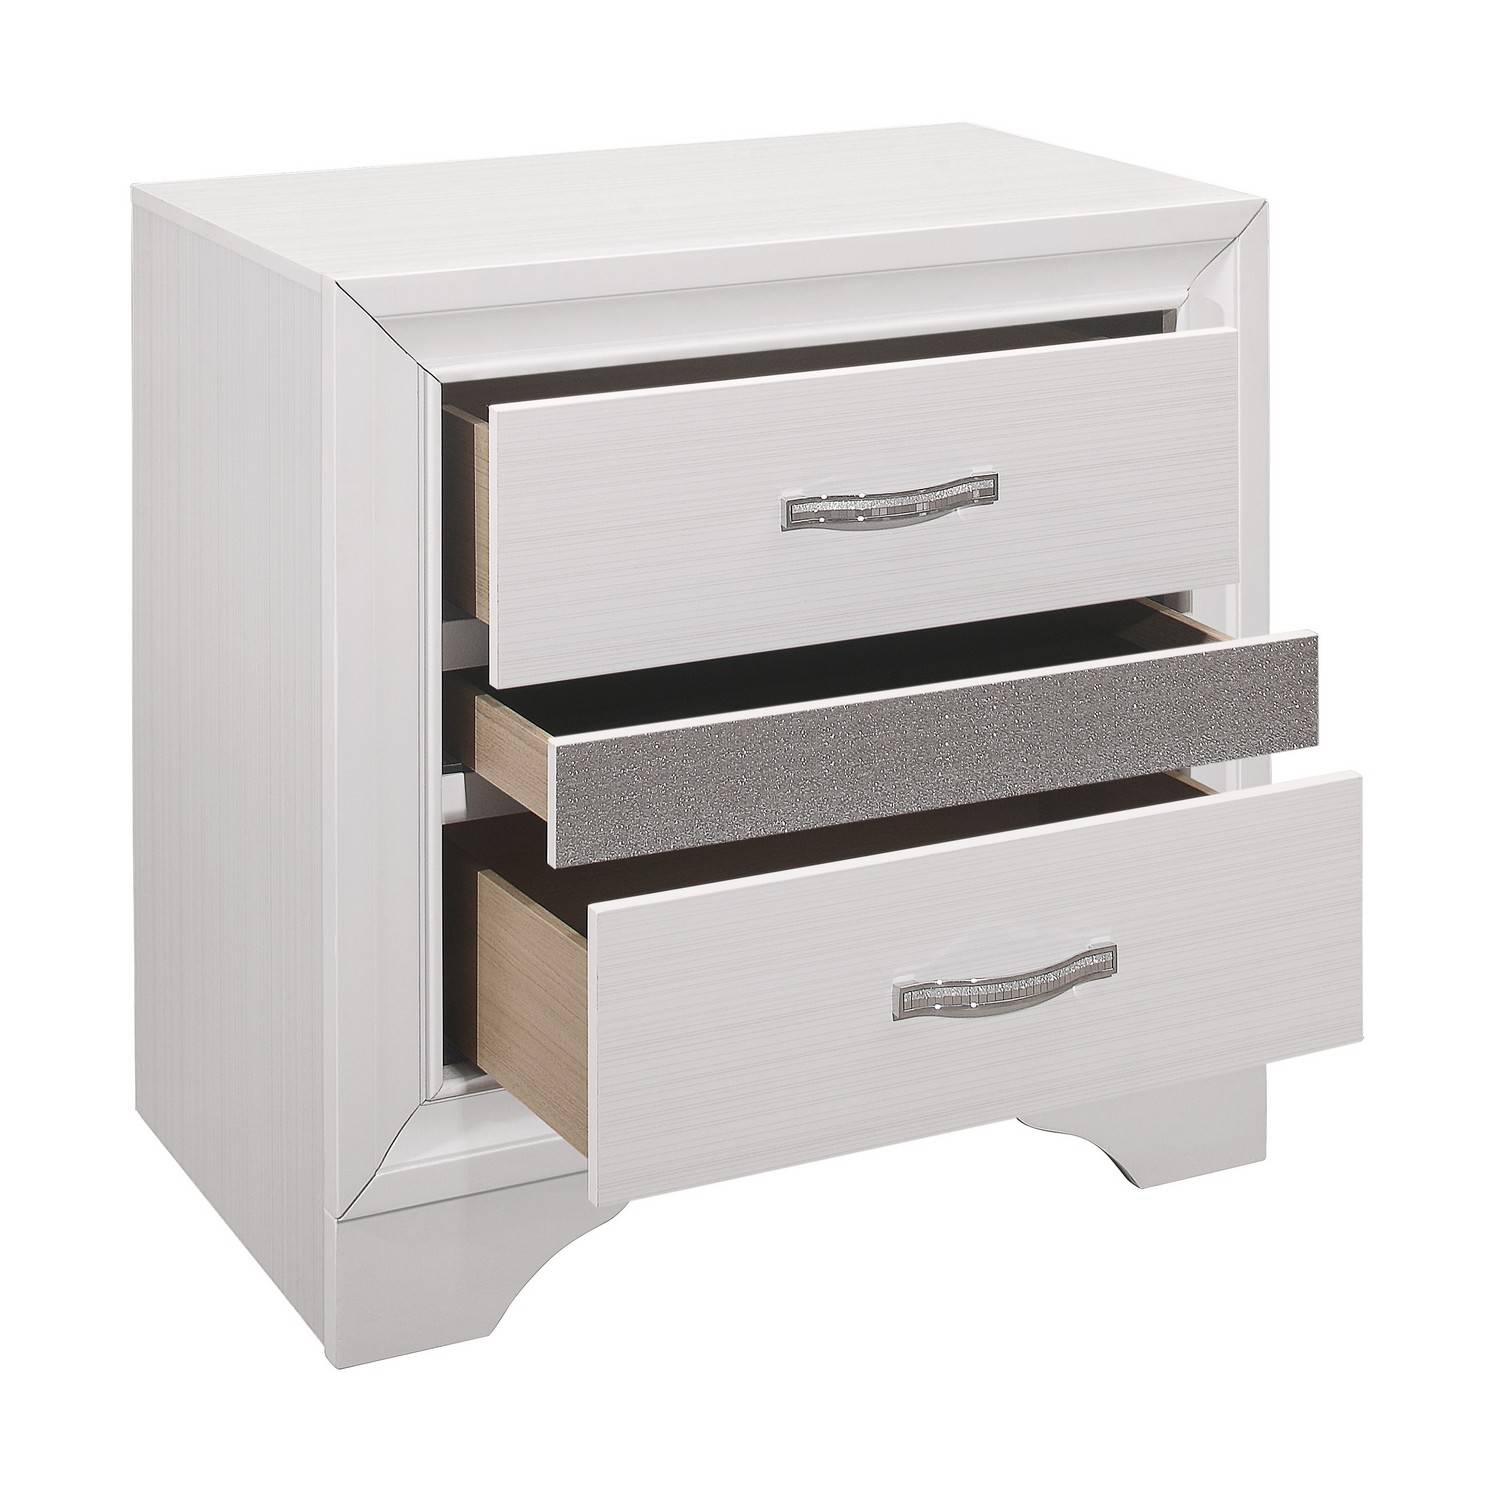 Homelegance Luster Night Stand - Two-tone : White And Silver Glitter